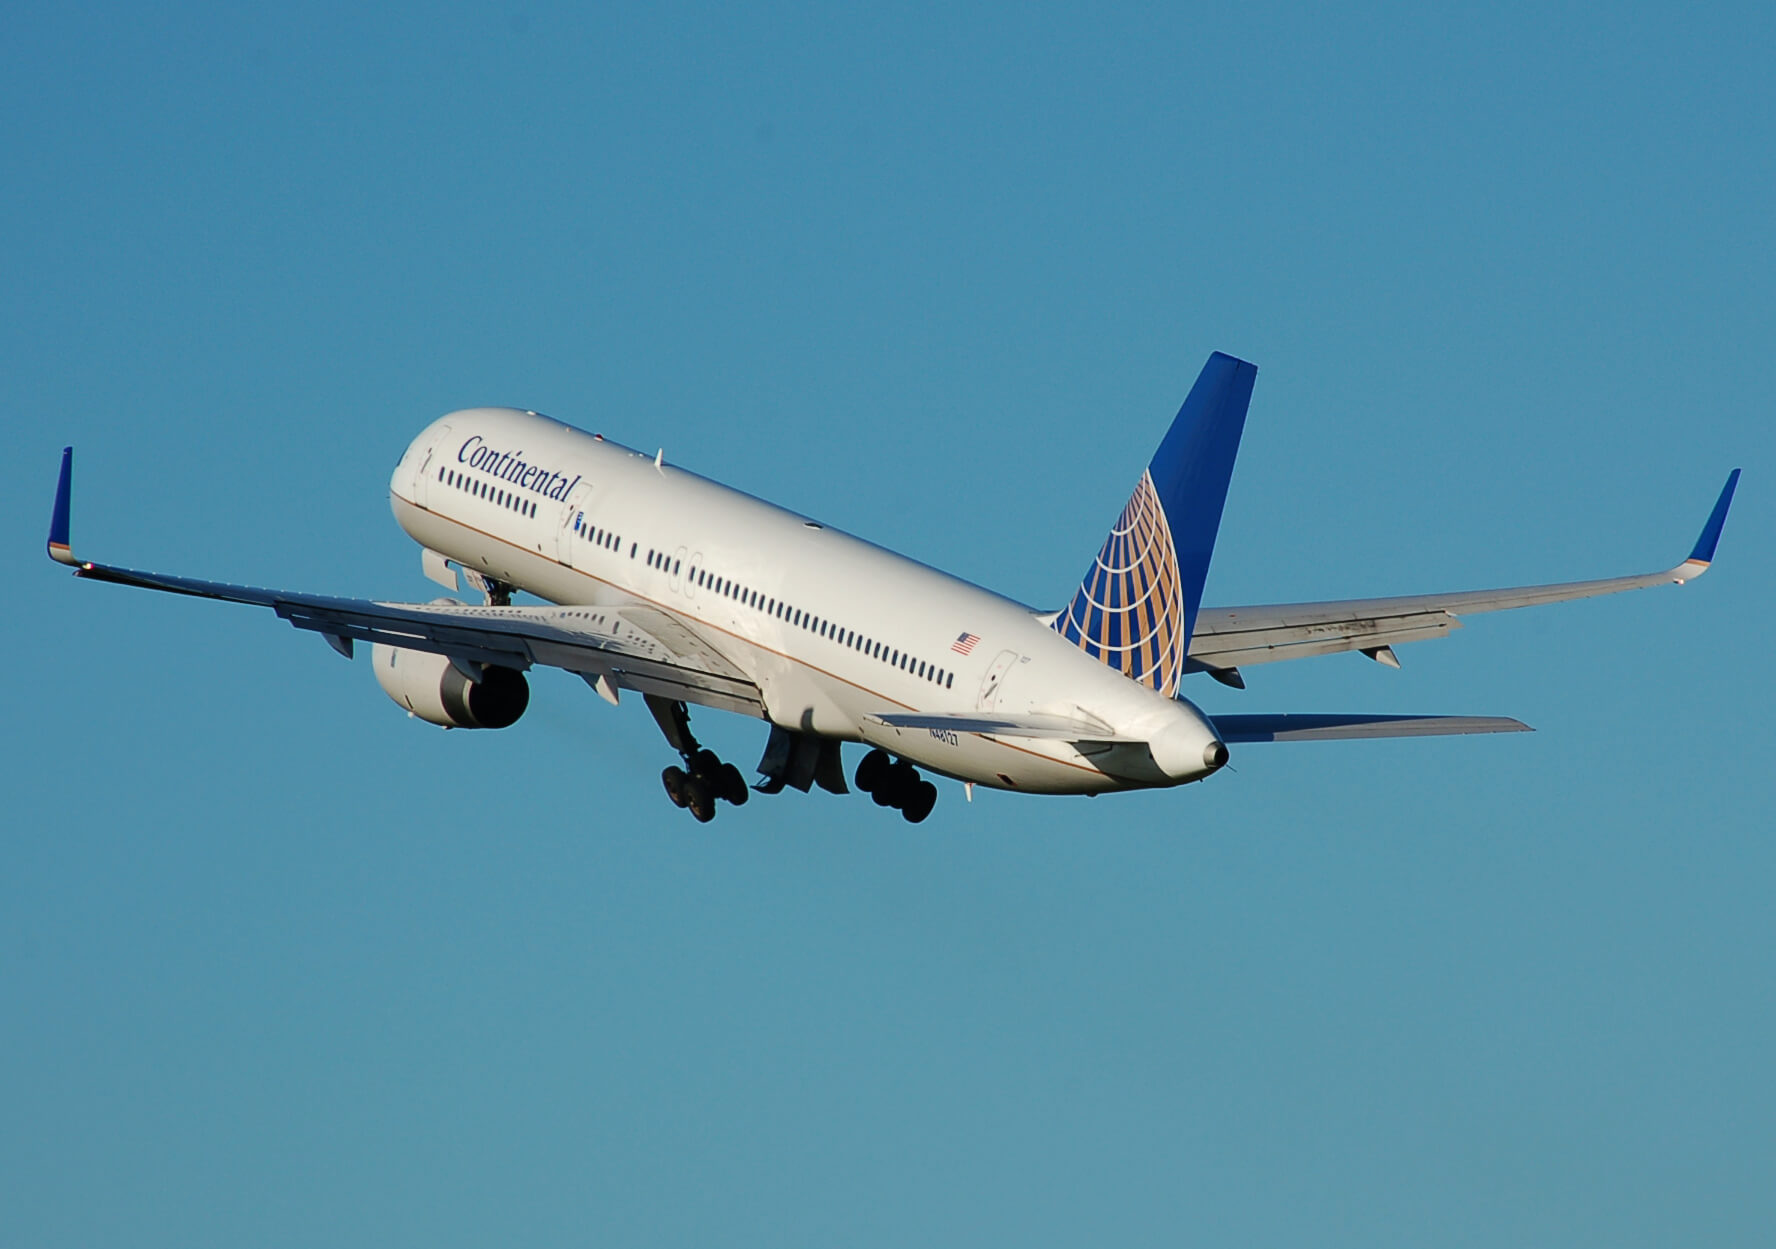 Top Ten Largest Airlines in the World